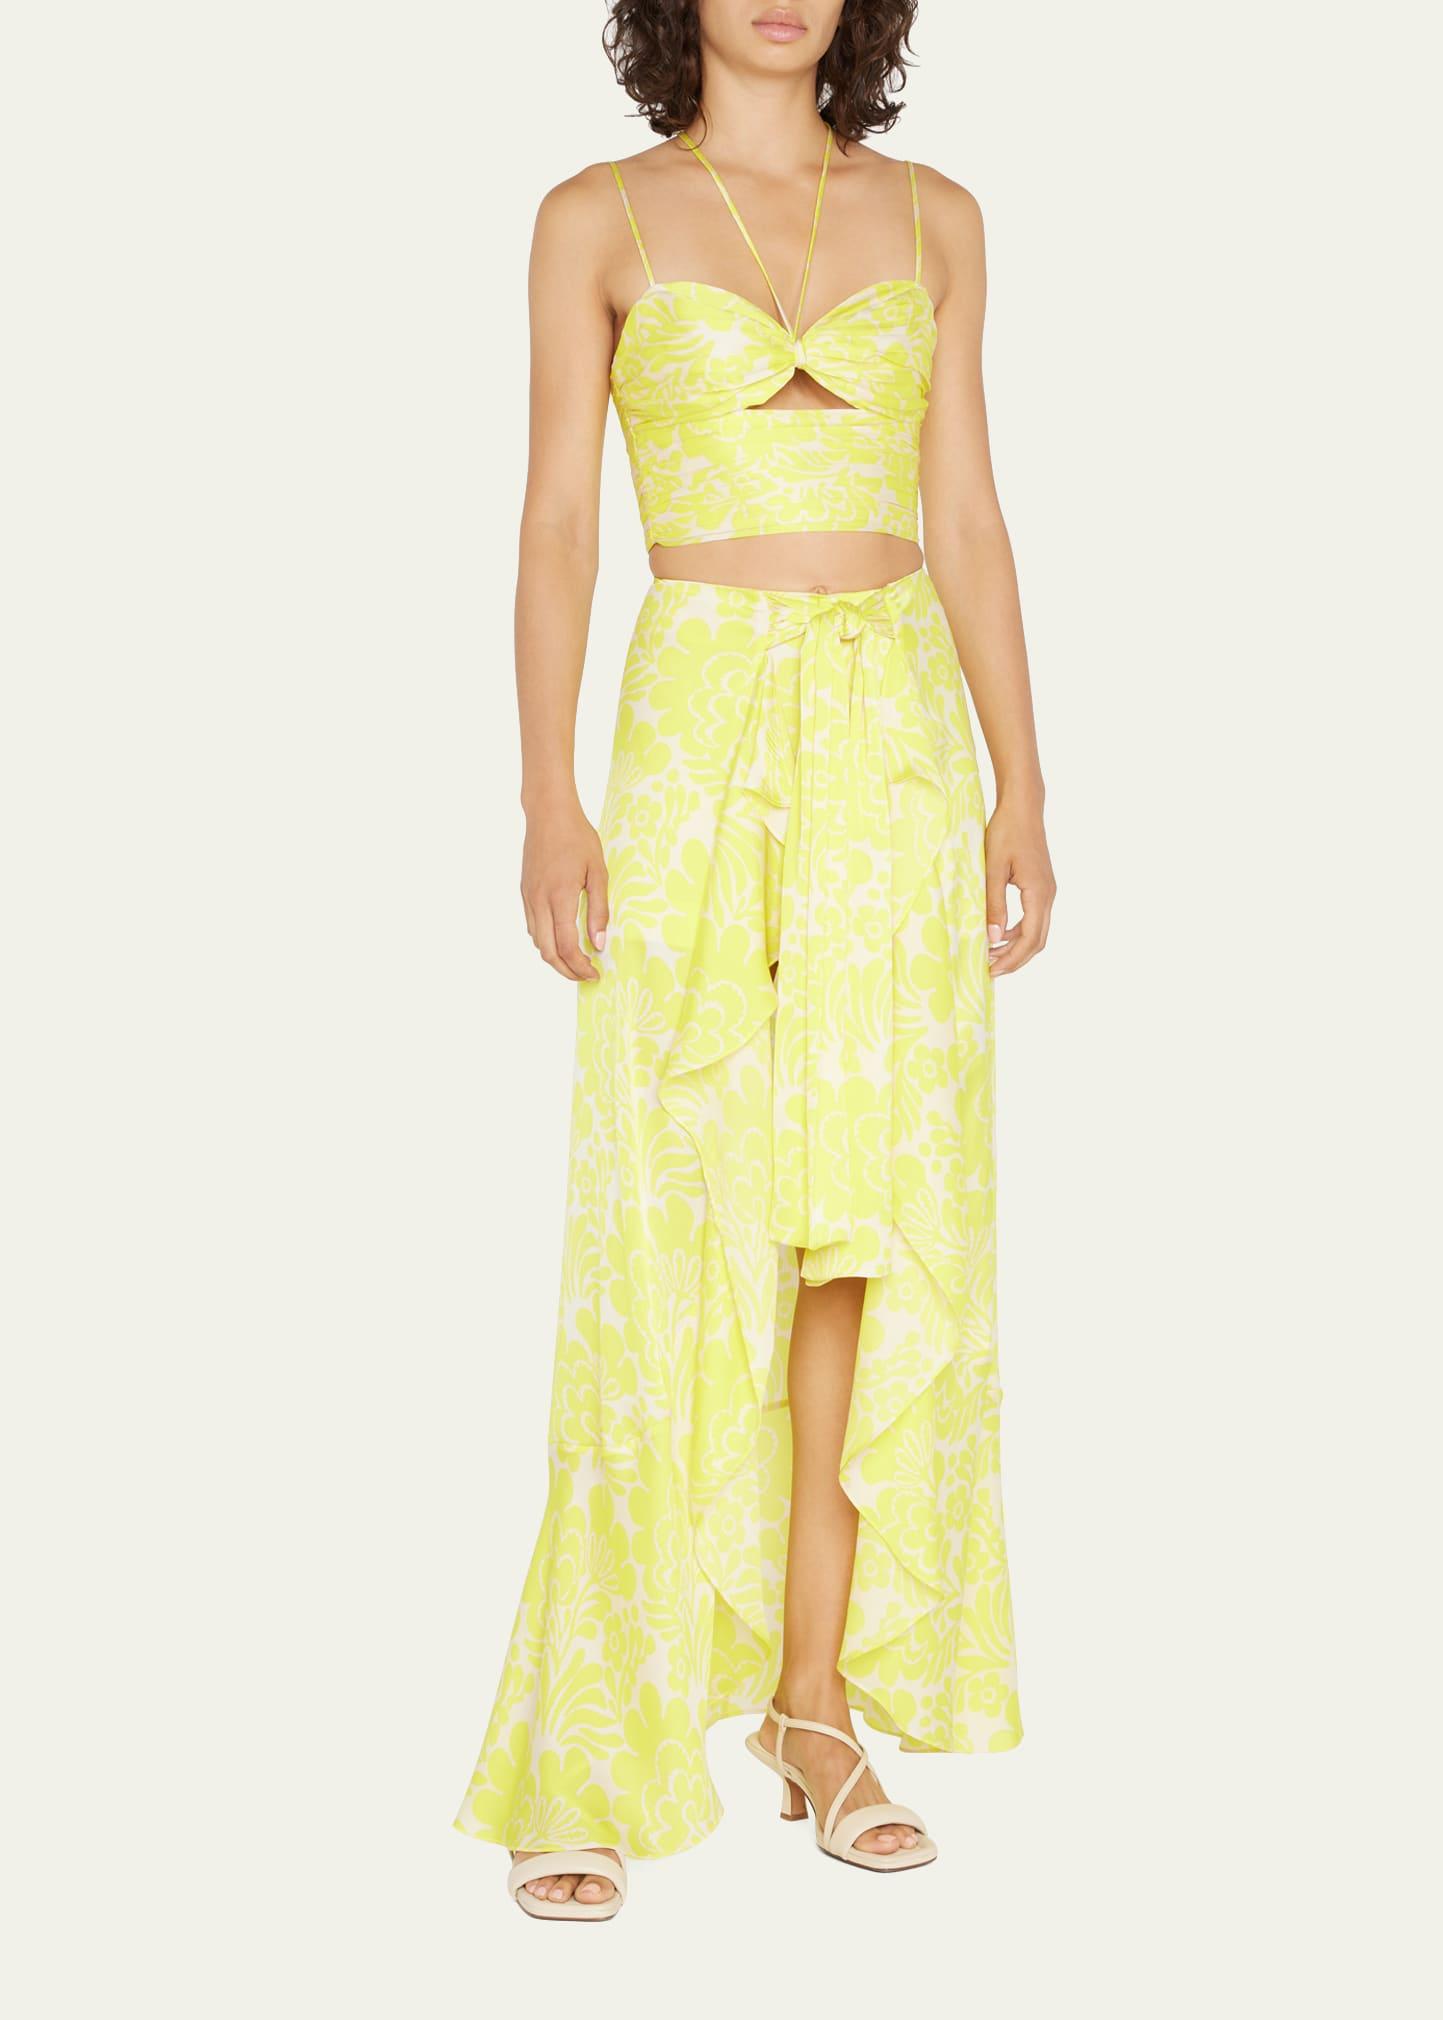 Alexis Bayleigh Cape & Shorts Two-piece Set in Yellow